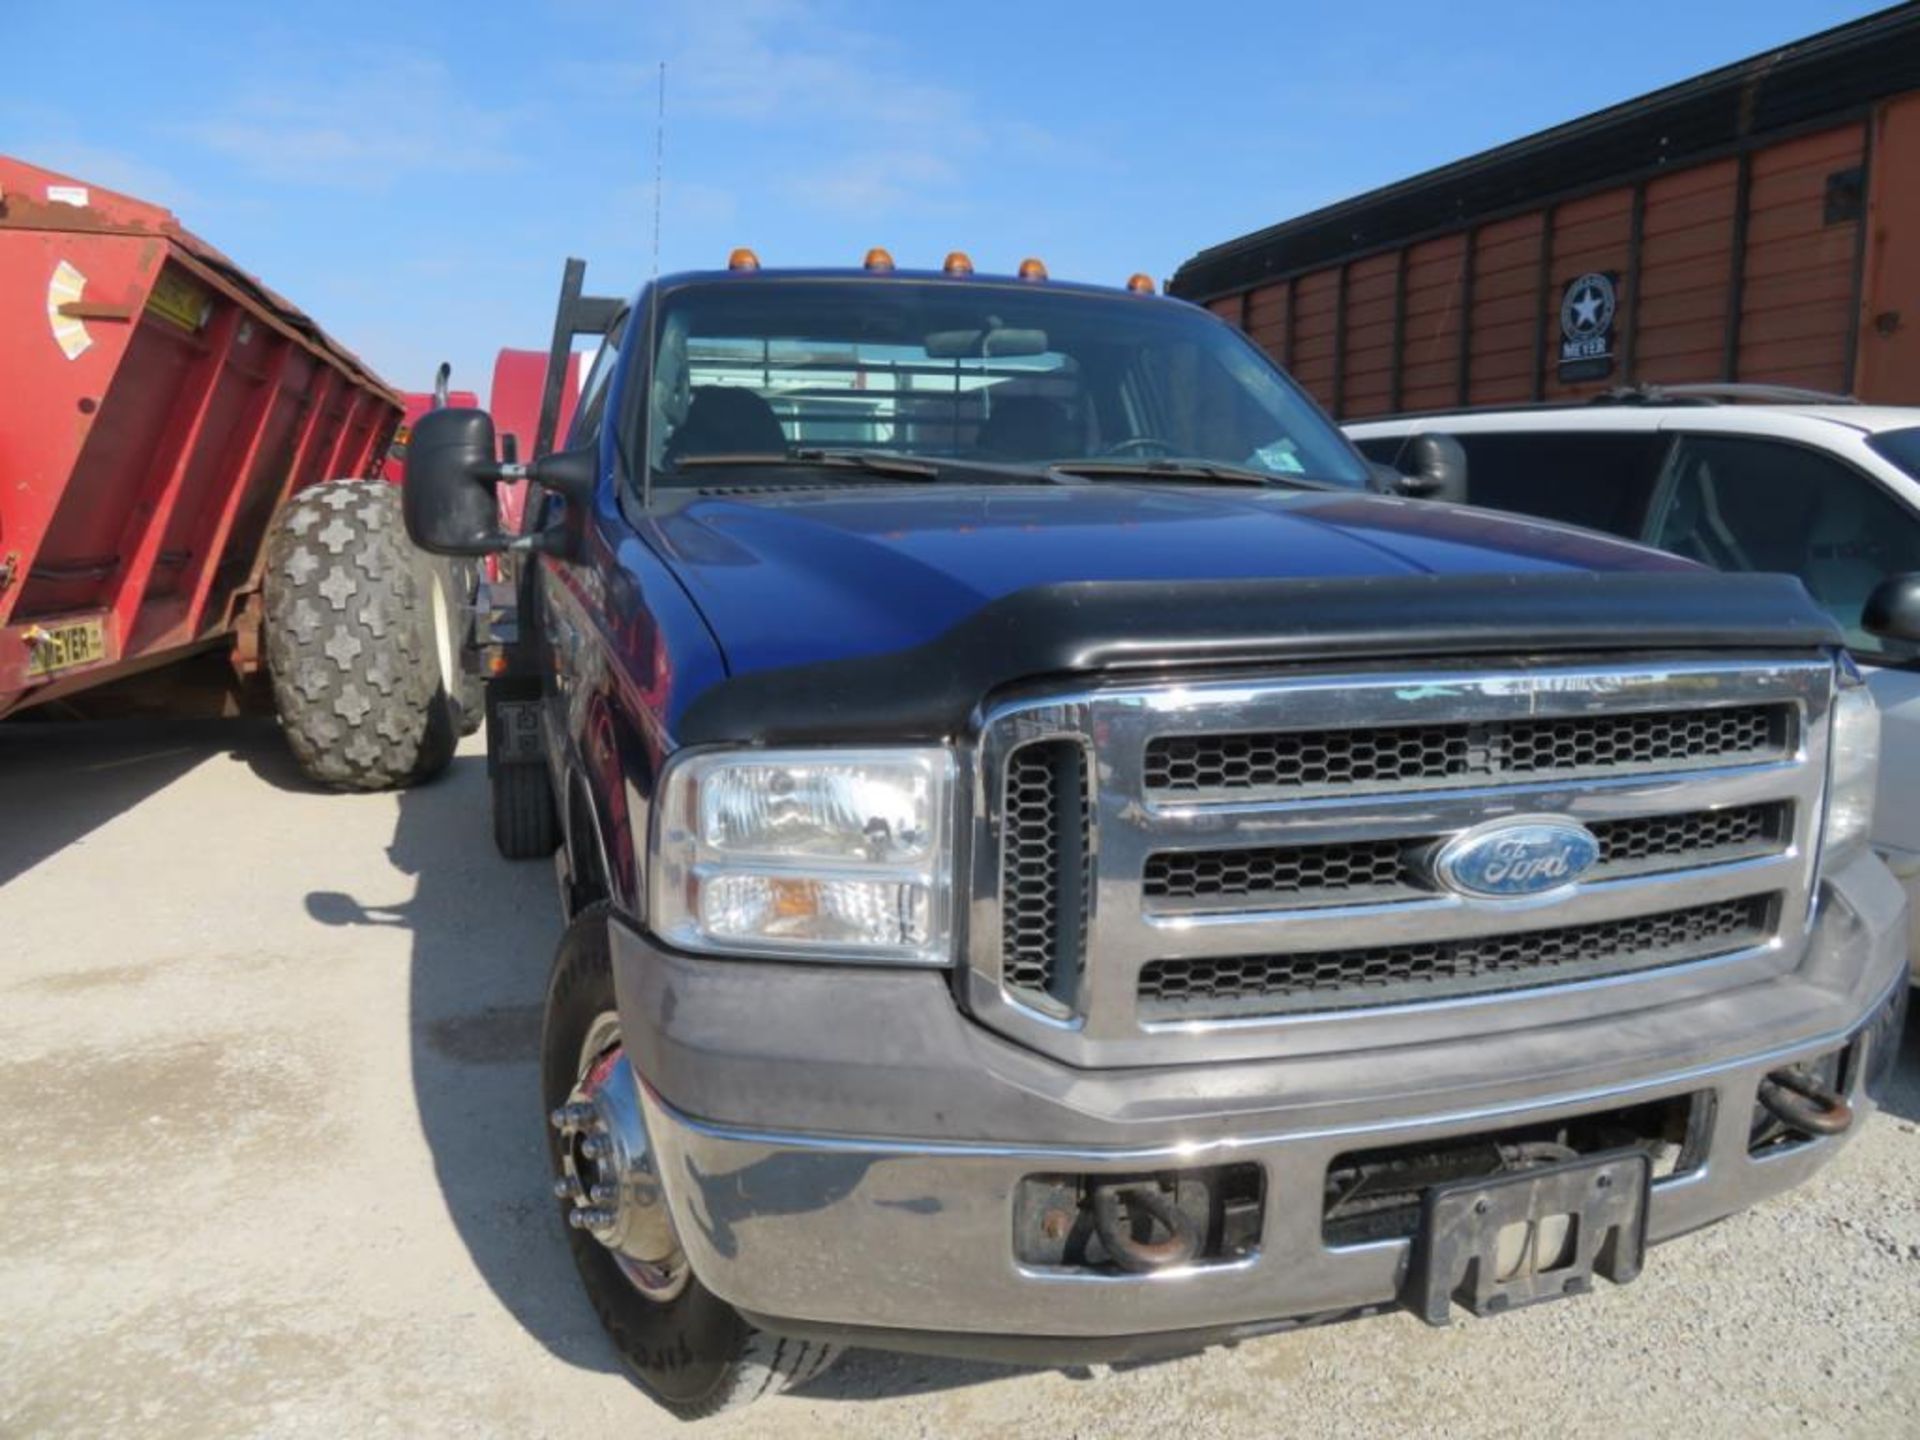 2000 F350 Reg Cab Dually Flatbed (title) 4x4, 6sp 260,100 miles, 7.3 Diesel New Transmission - Image 4 of 9